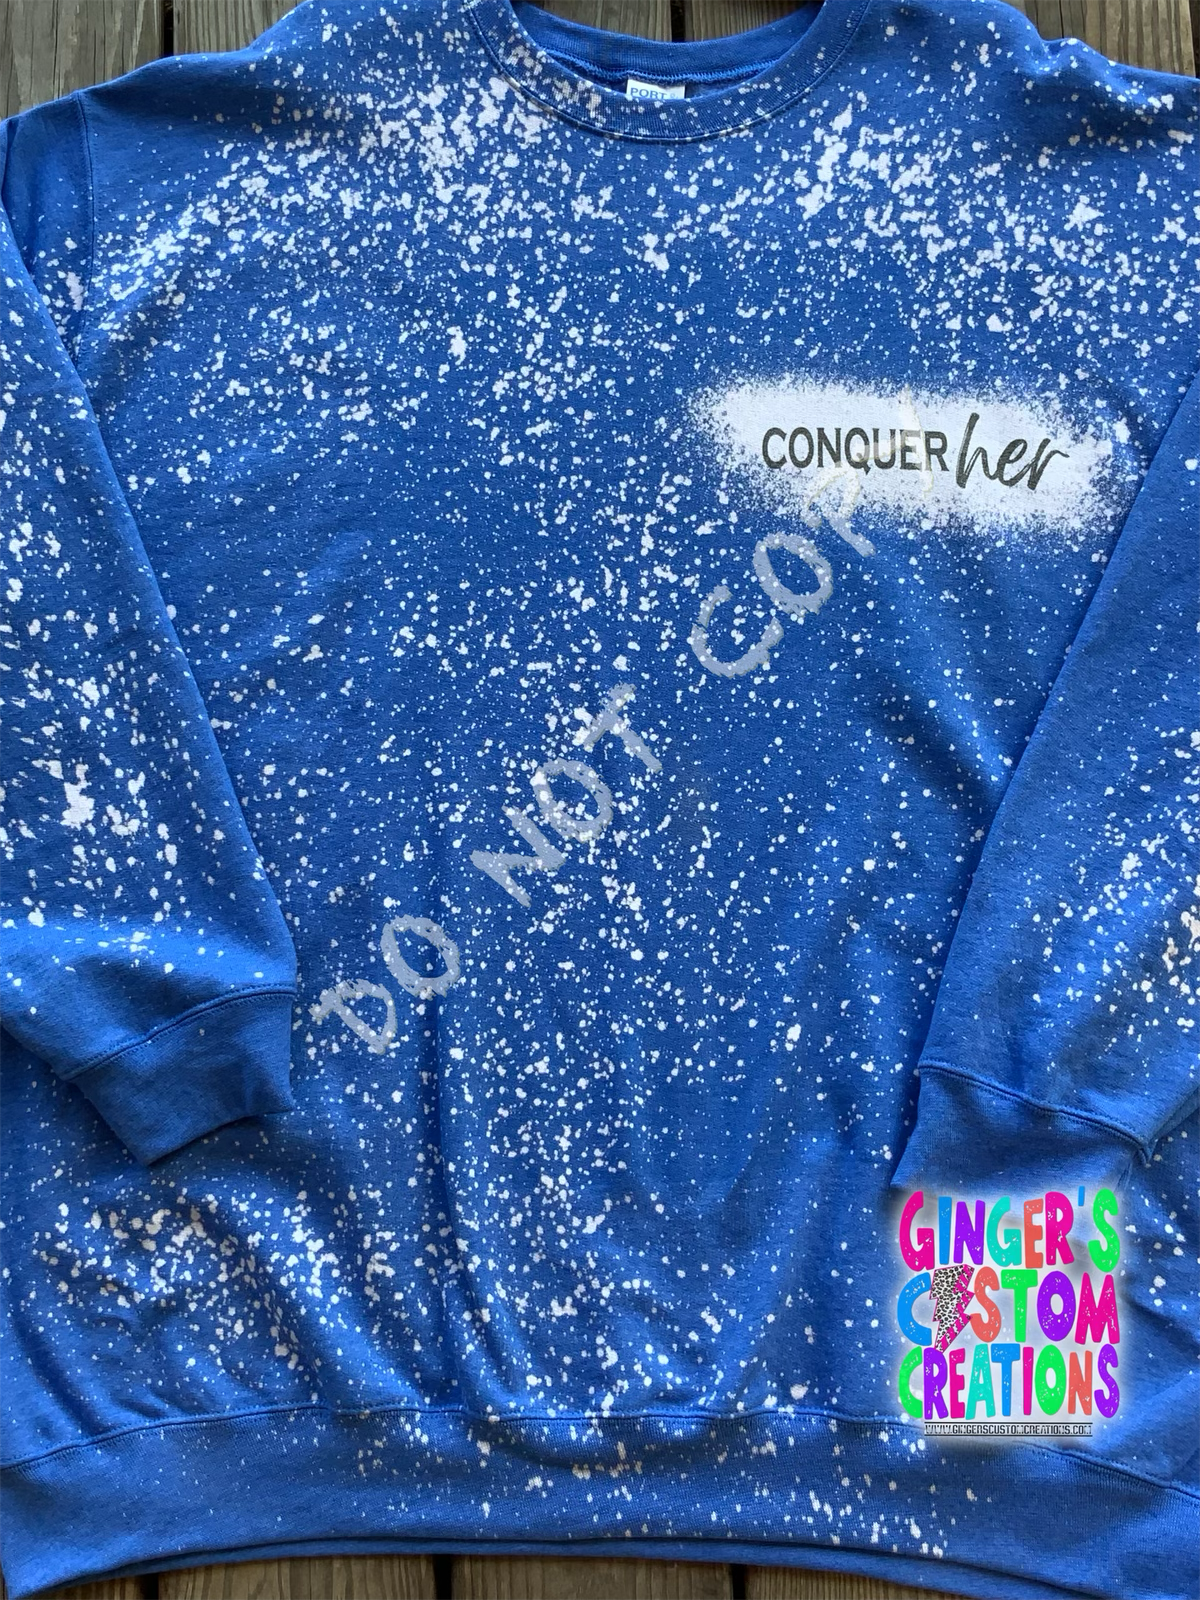 SHE CONQUERED HER DEMONS CONQUER-HER FRONT & BACK BLUE BLEACHED CREWNECK SWEATSHIRT